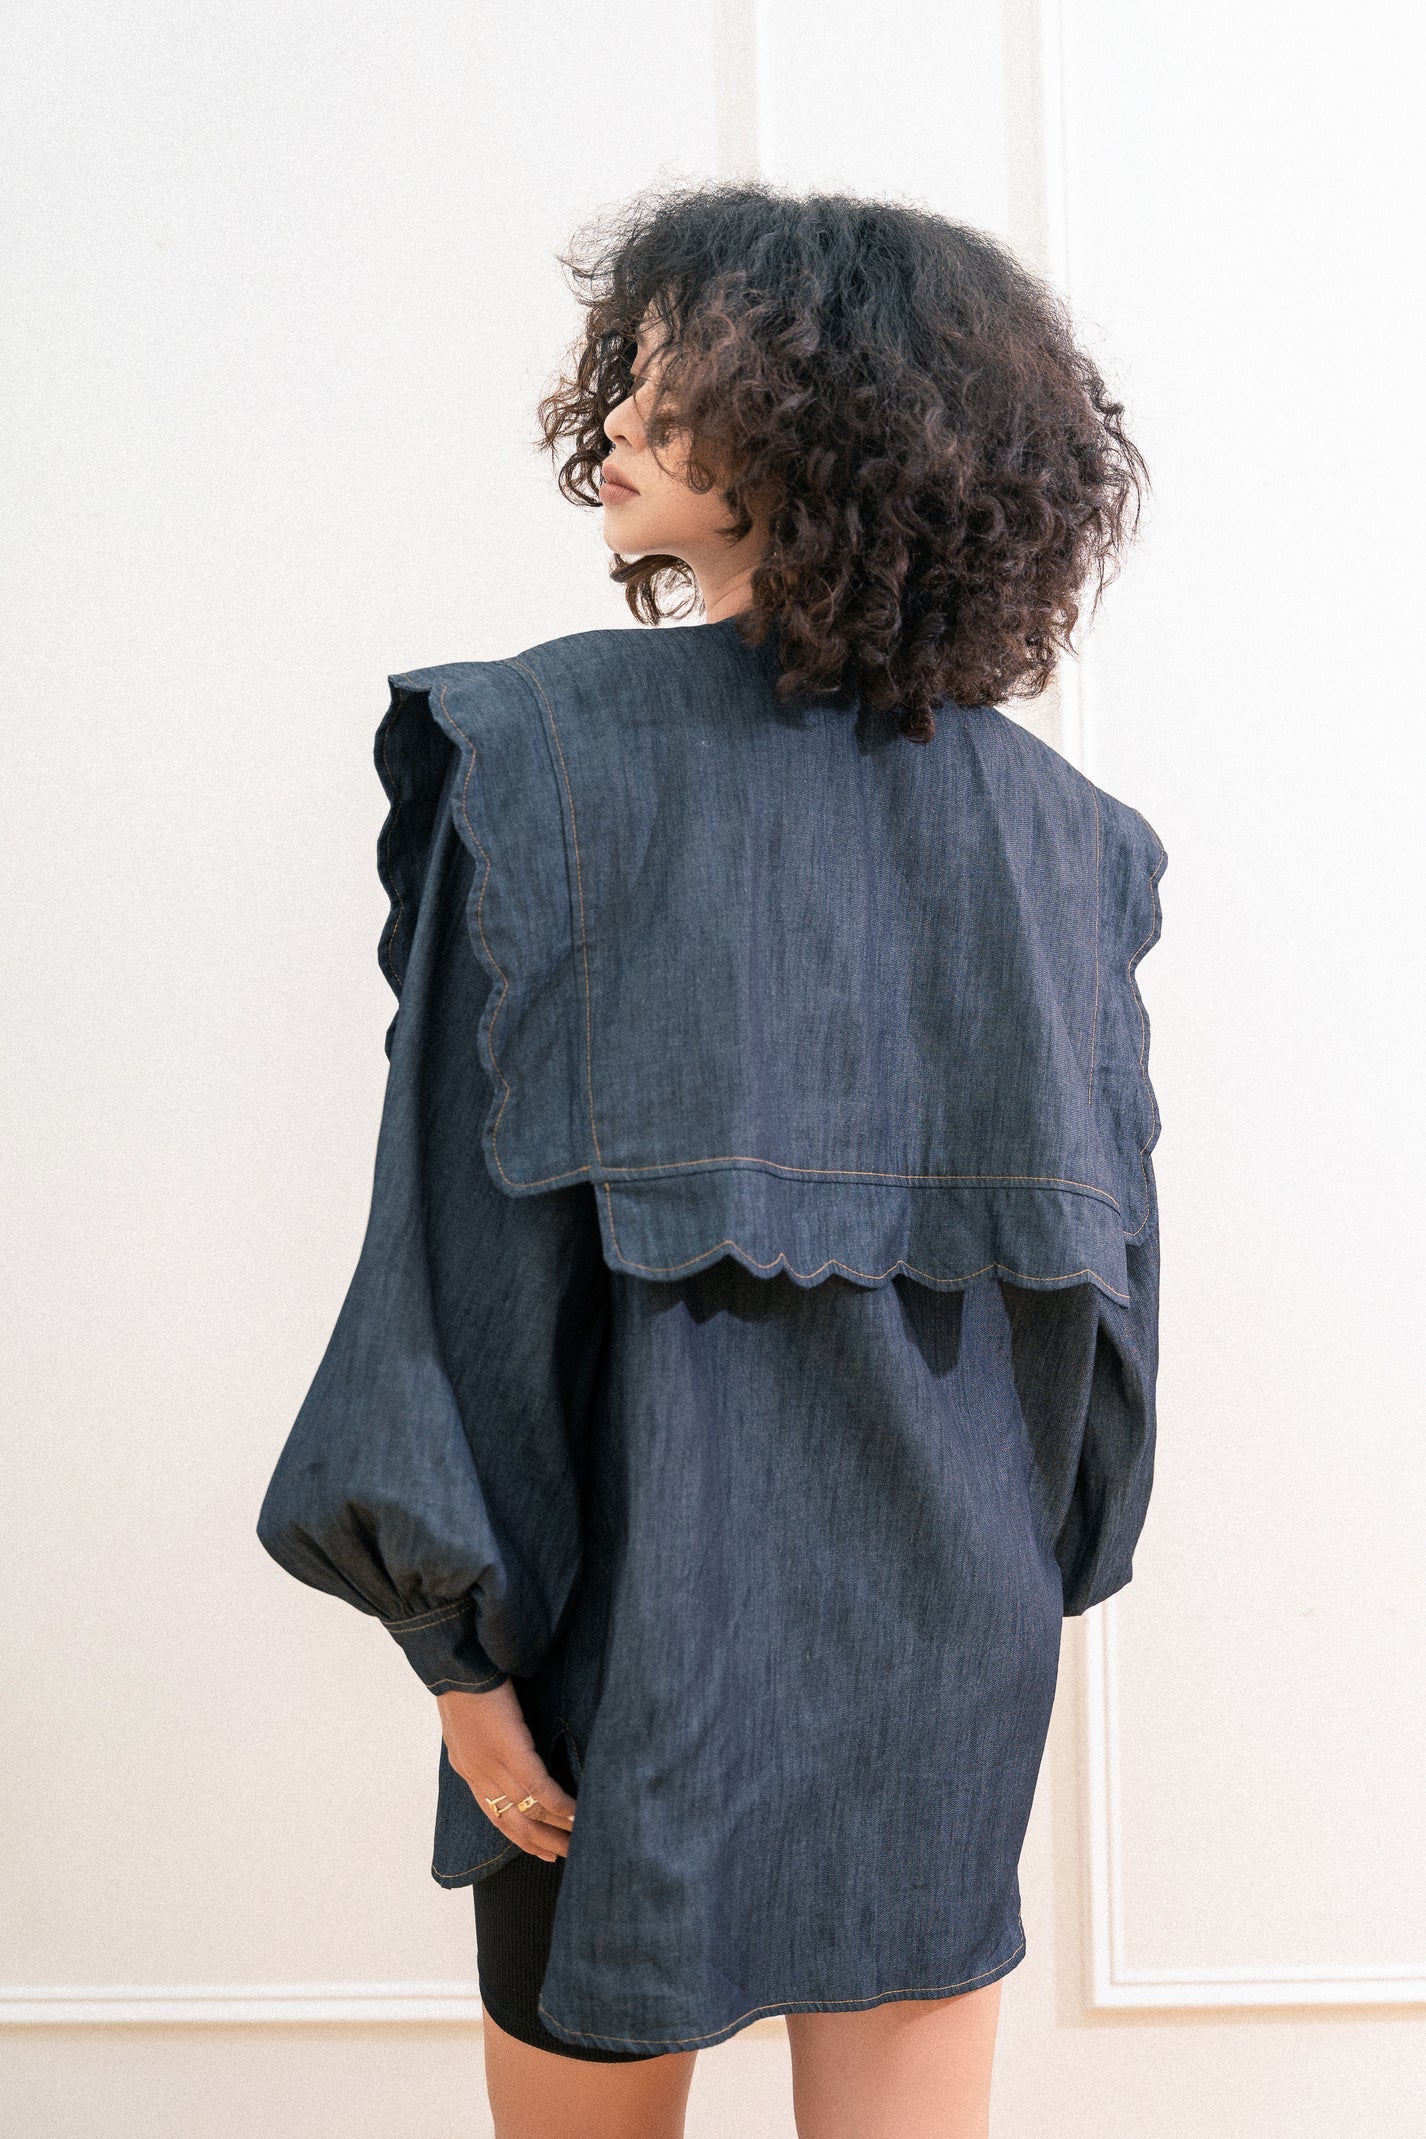 Denim shirt with long puff sleeves and sailor collar for women